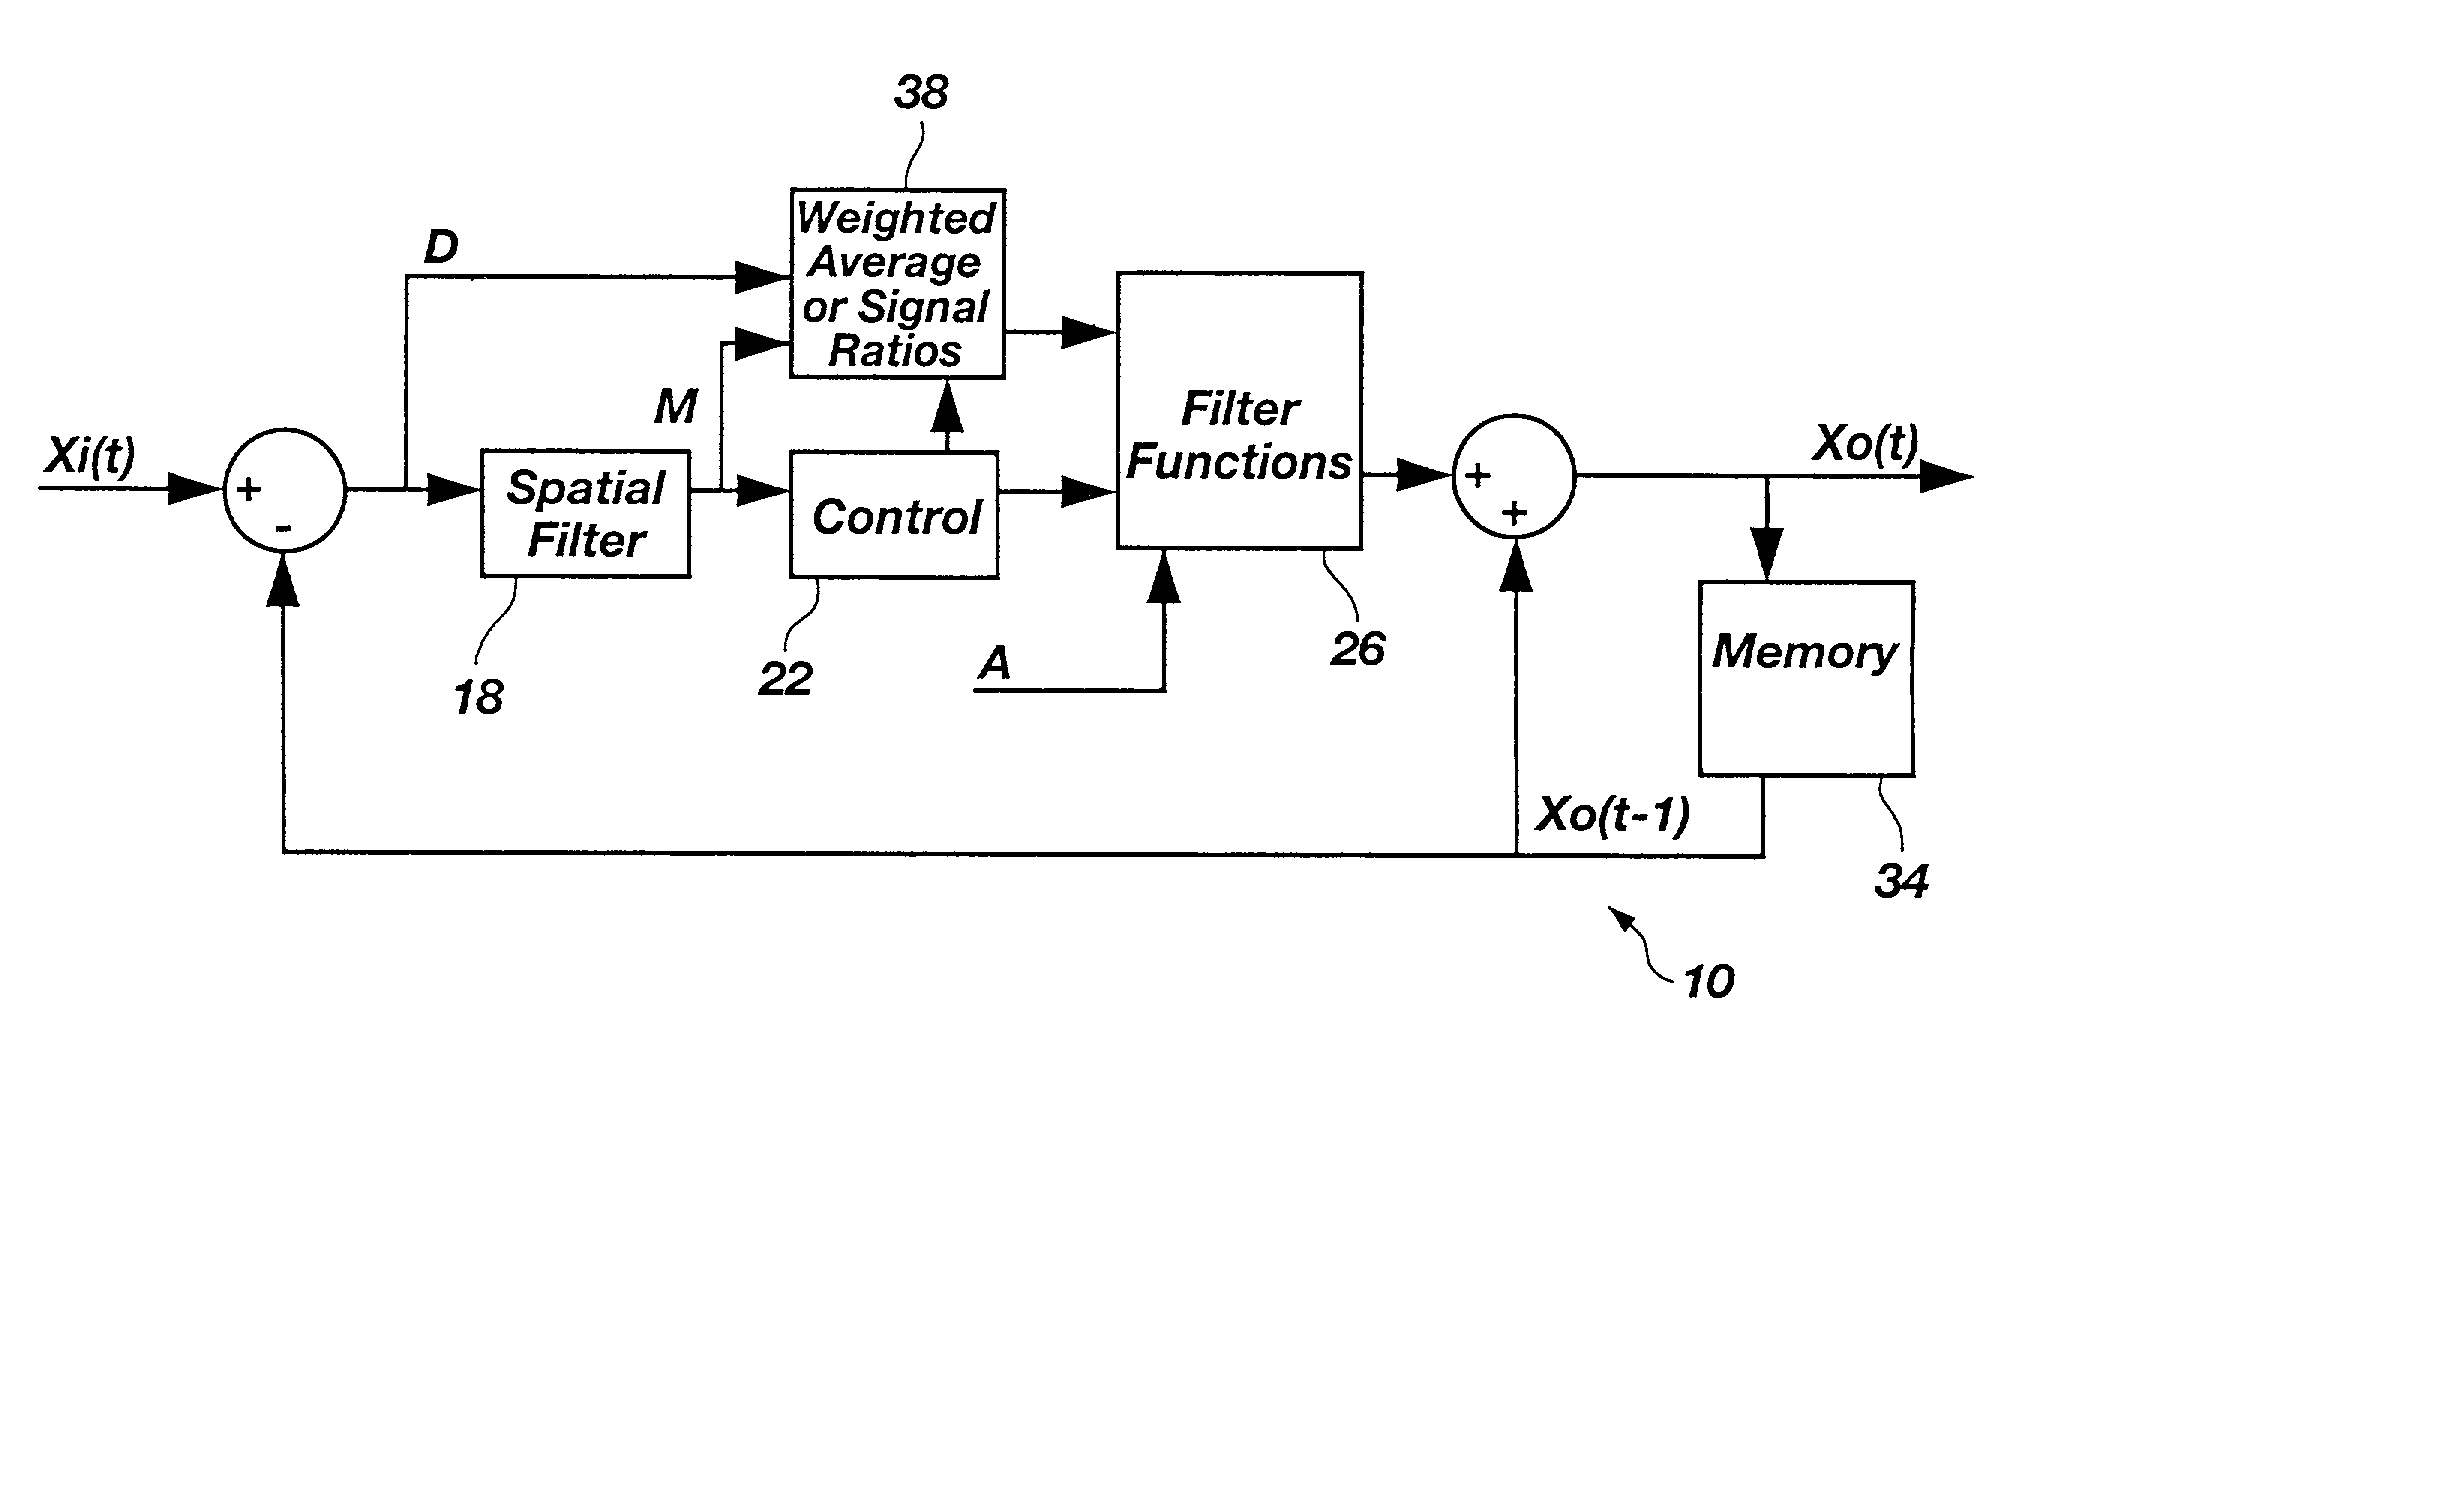 Method and apparatus for reducing motion artifacts and noise in video image processing